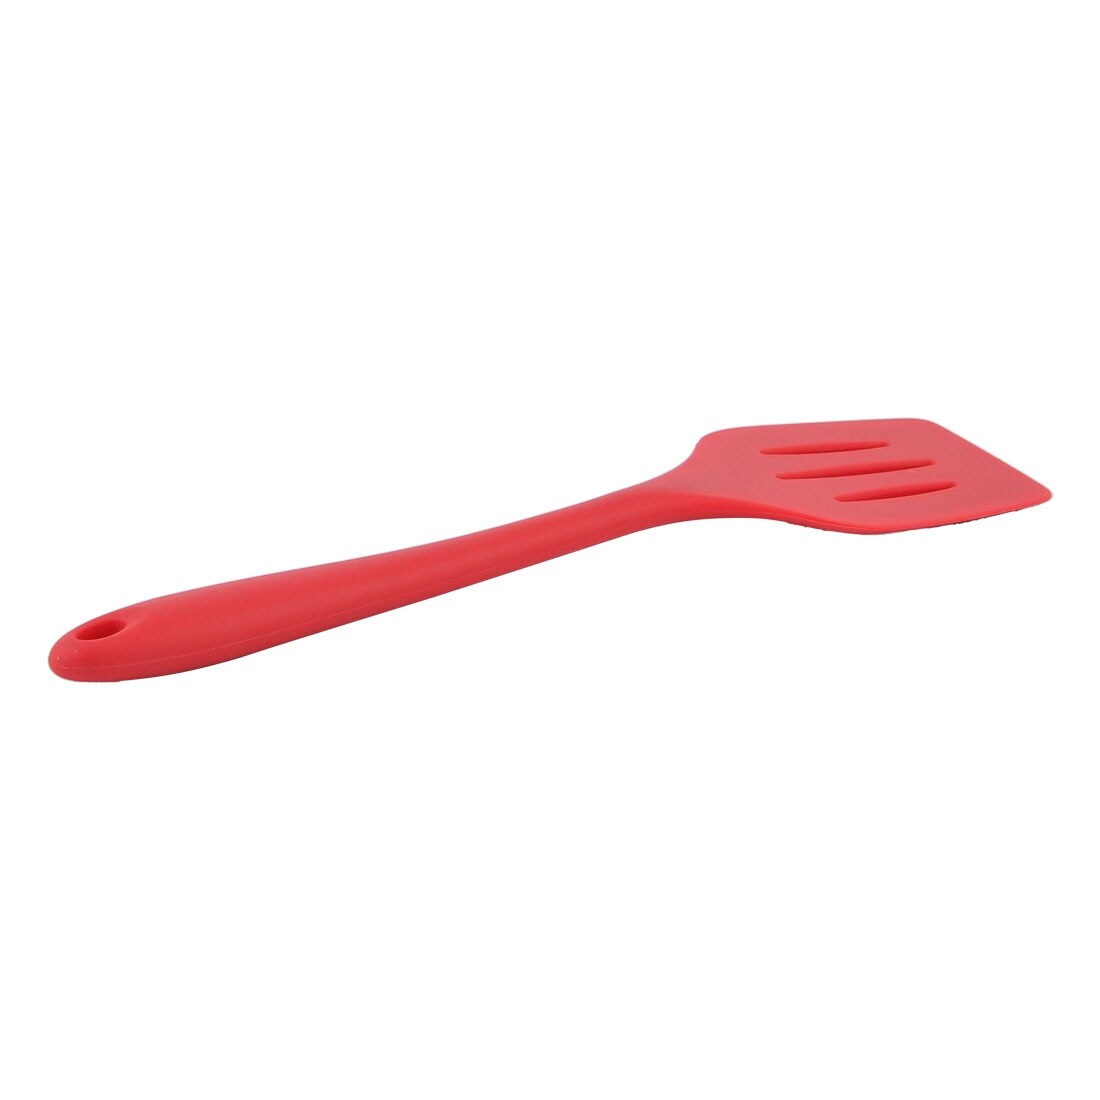 https://ak1.ostkcdn.com/images/products/is/images/direct/5c2fb14ff08fe397a02f5d1d85acb54a95f17c48/Household-Kitchen-Silicone-Non-Stick-Food-Mixing-Pancake-Turner-Spatula-Red.jpg